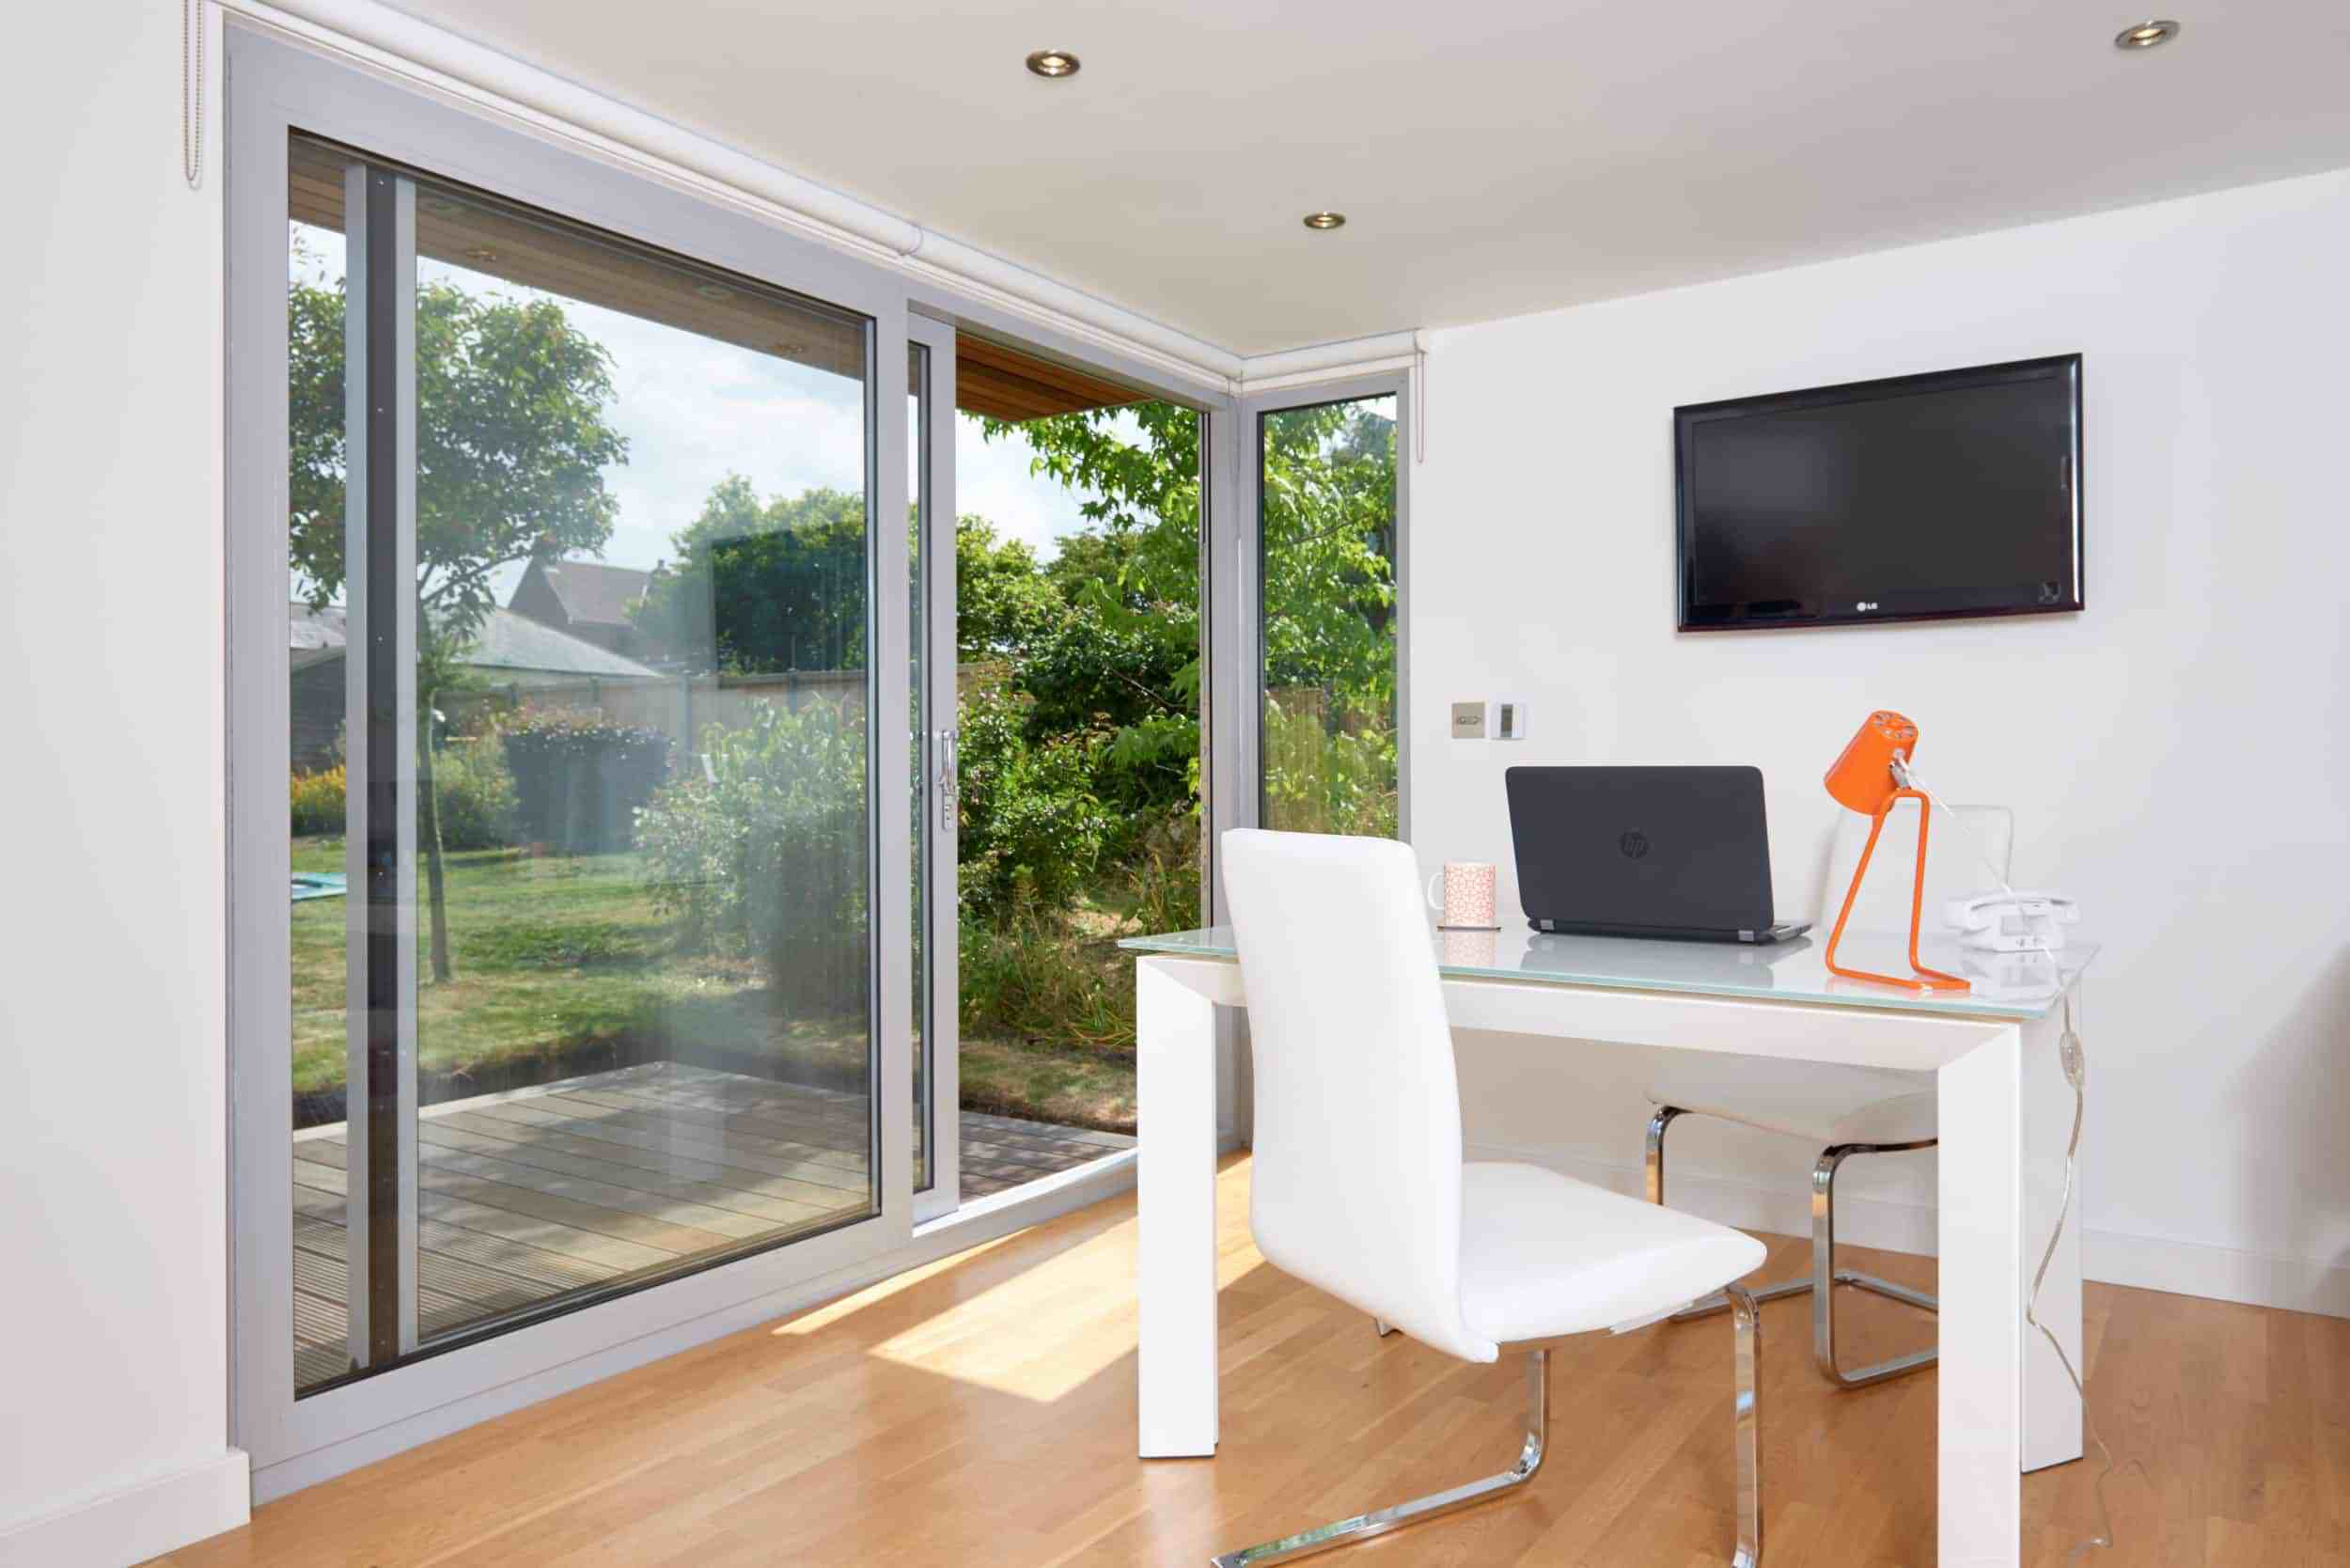 Top tips for creating an insulated garden room that you will use all year round